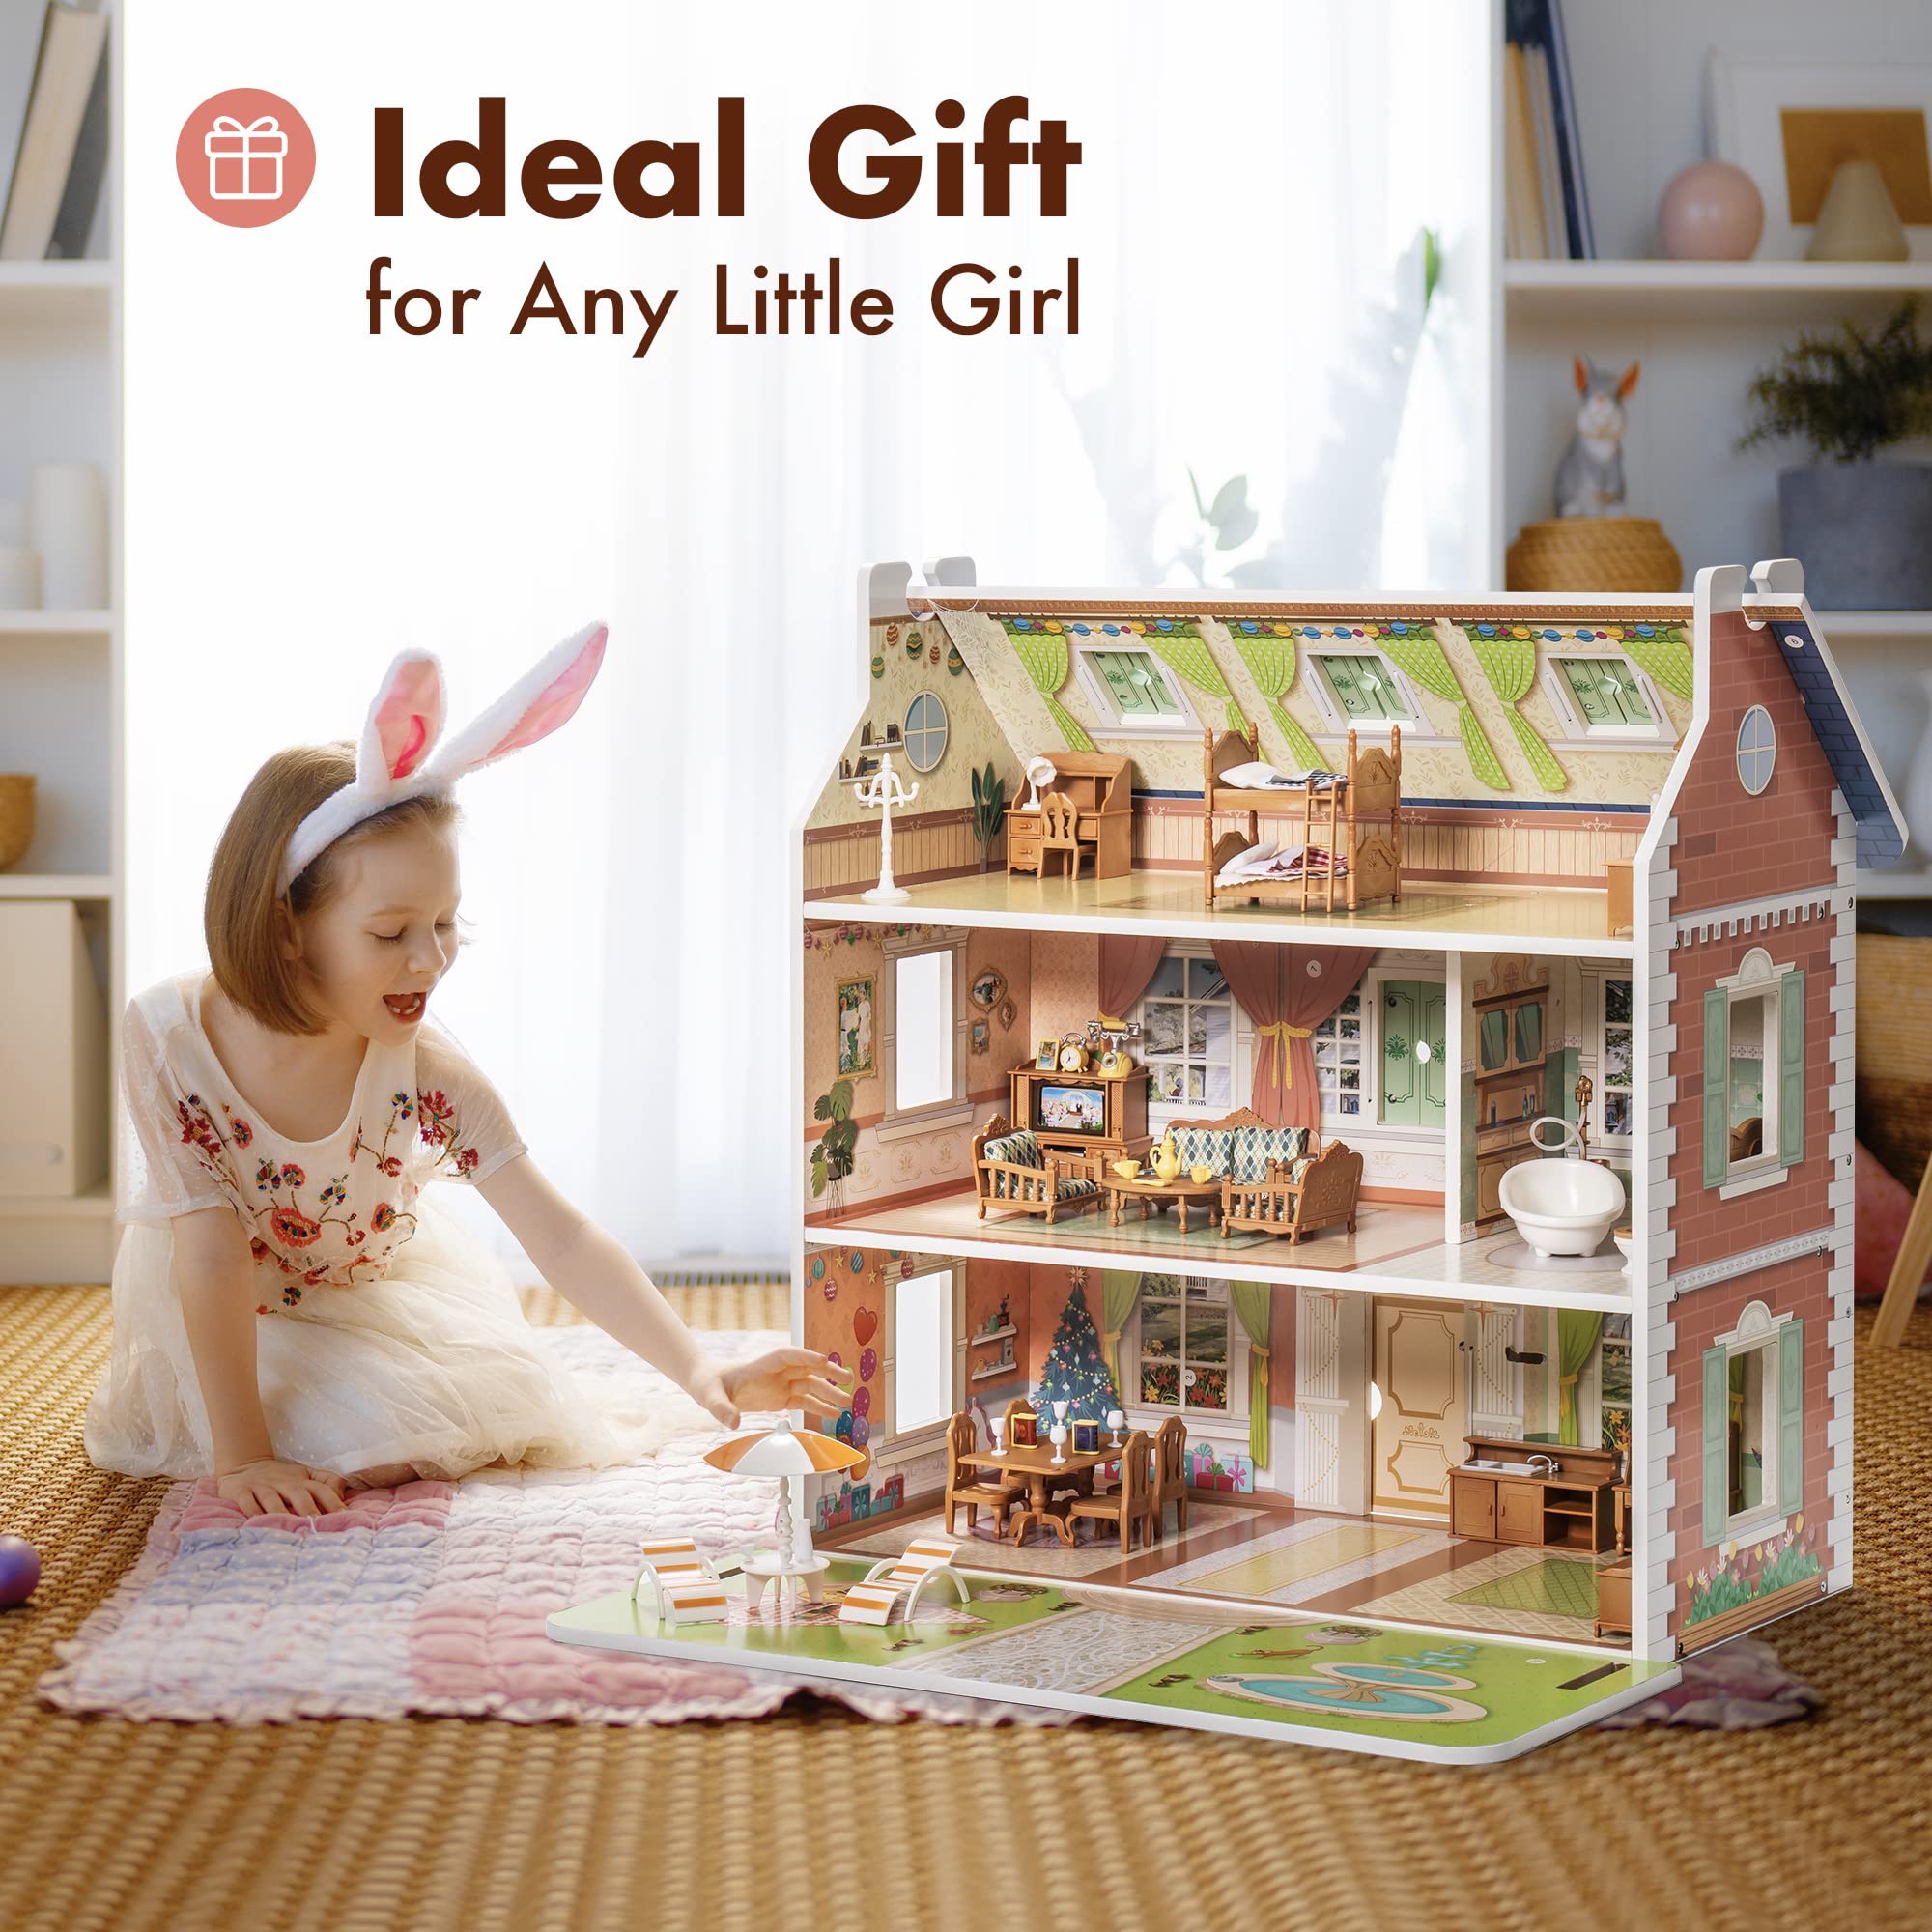 ROBUD Wooden Dollhouse for Kids Girls, Pretend Play Toy Gift for 3 4 5 6 Years Old Girls Boys